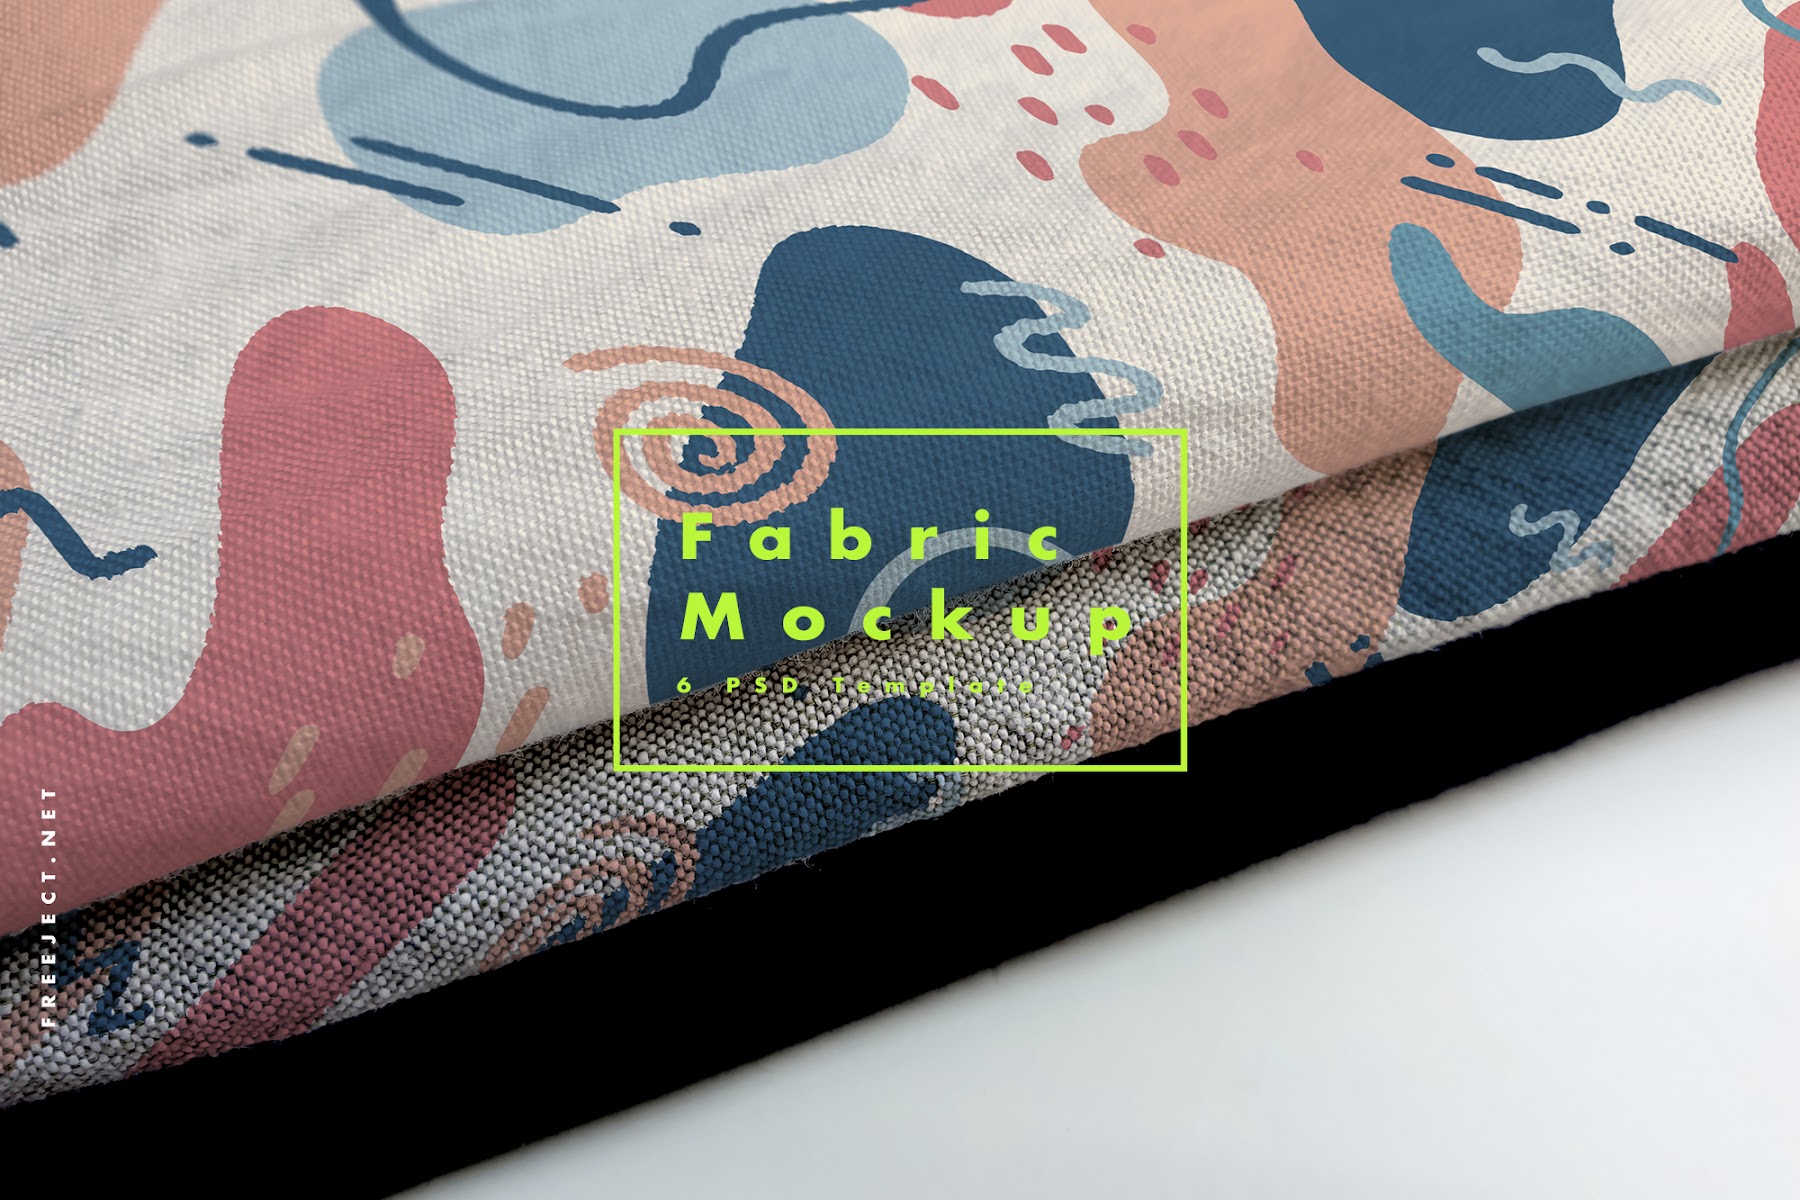 Download Free 5852+ Fabric Mockup Psd Free Yellowimages Mockups free packaging mockups from the trusted websites.